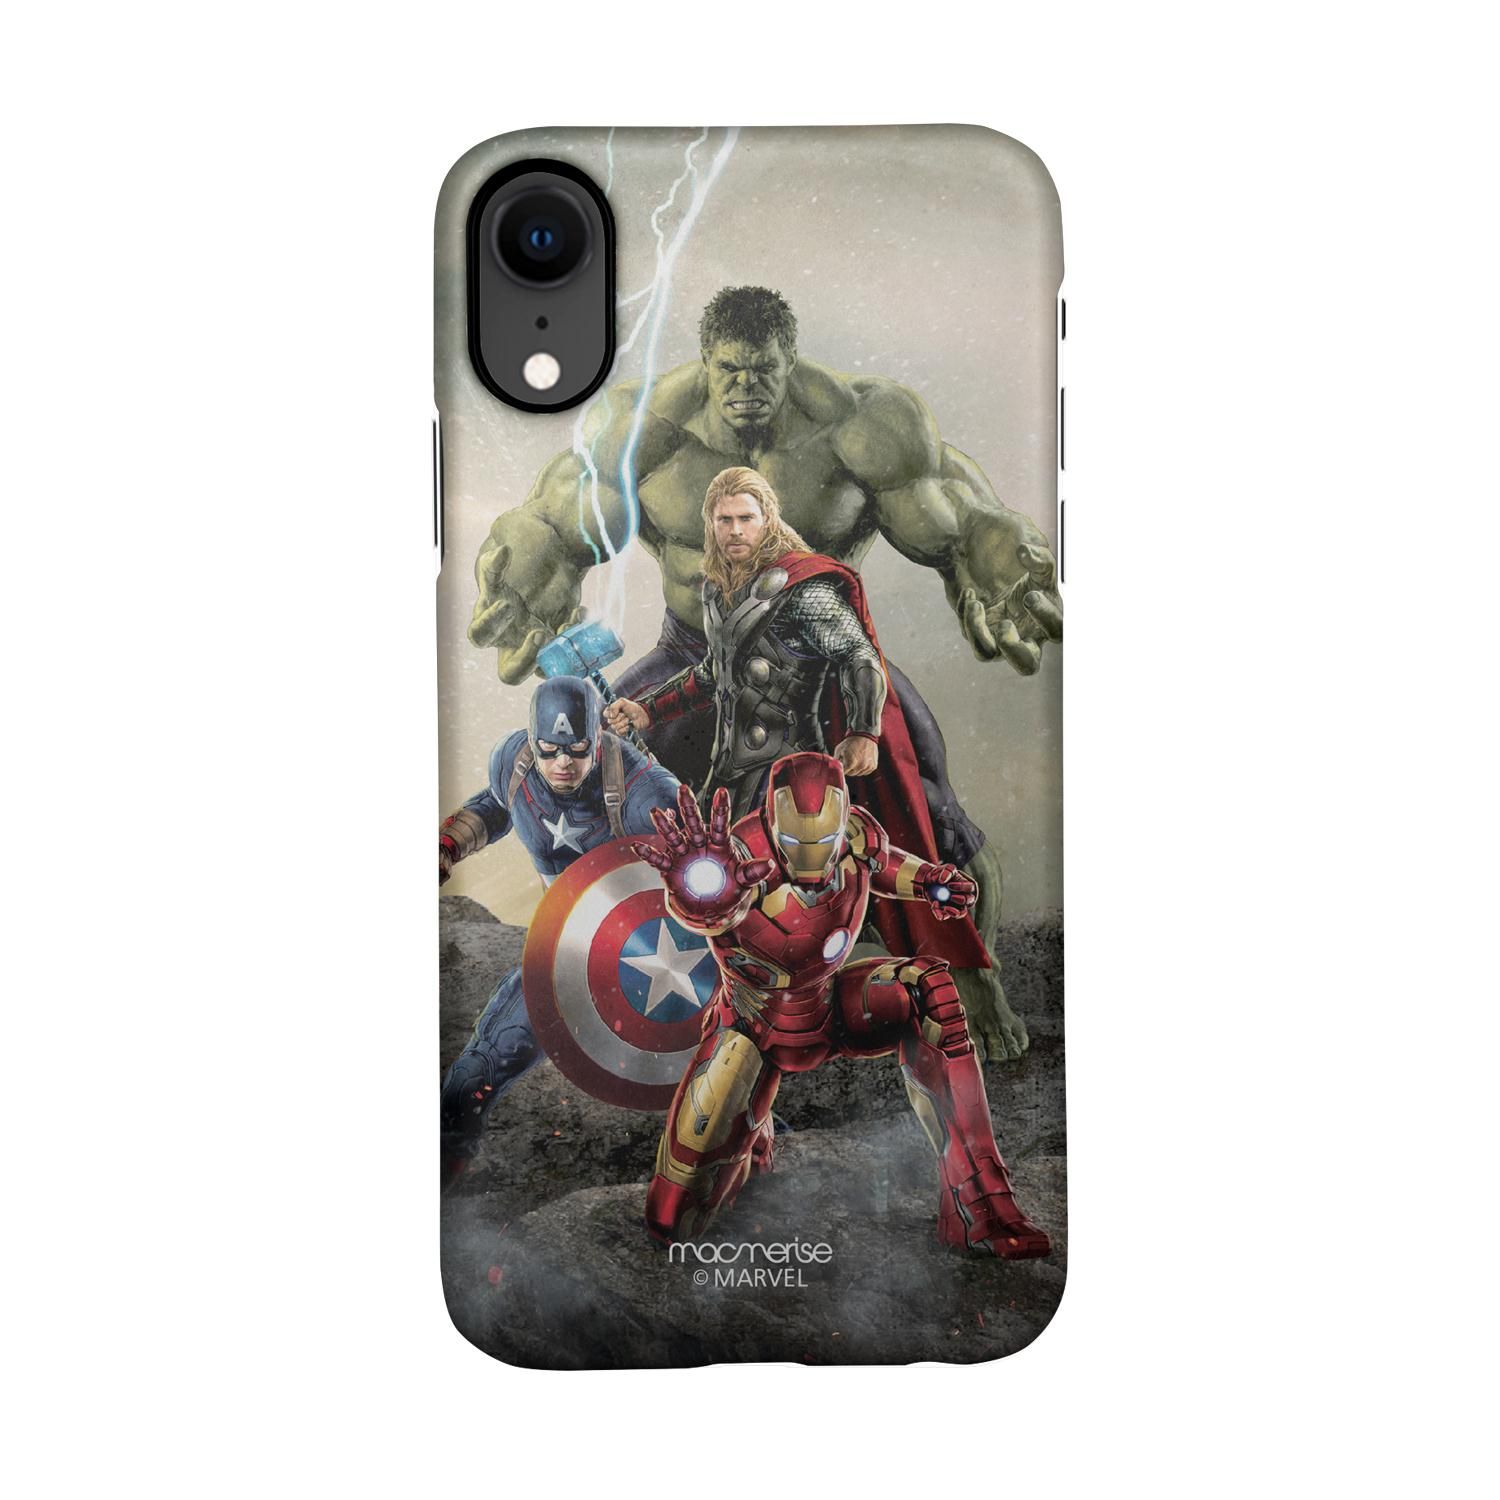 Buy Time to Avenge - Sleek Phone Case for iPhone XR Online